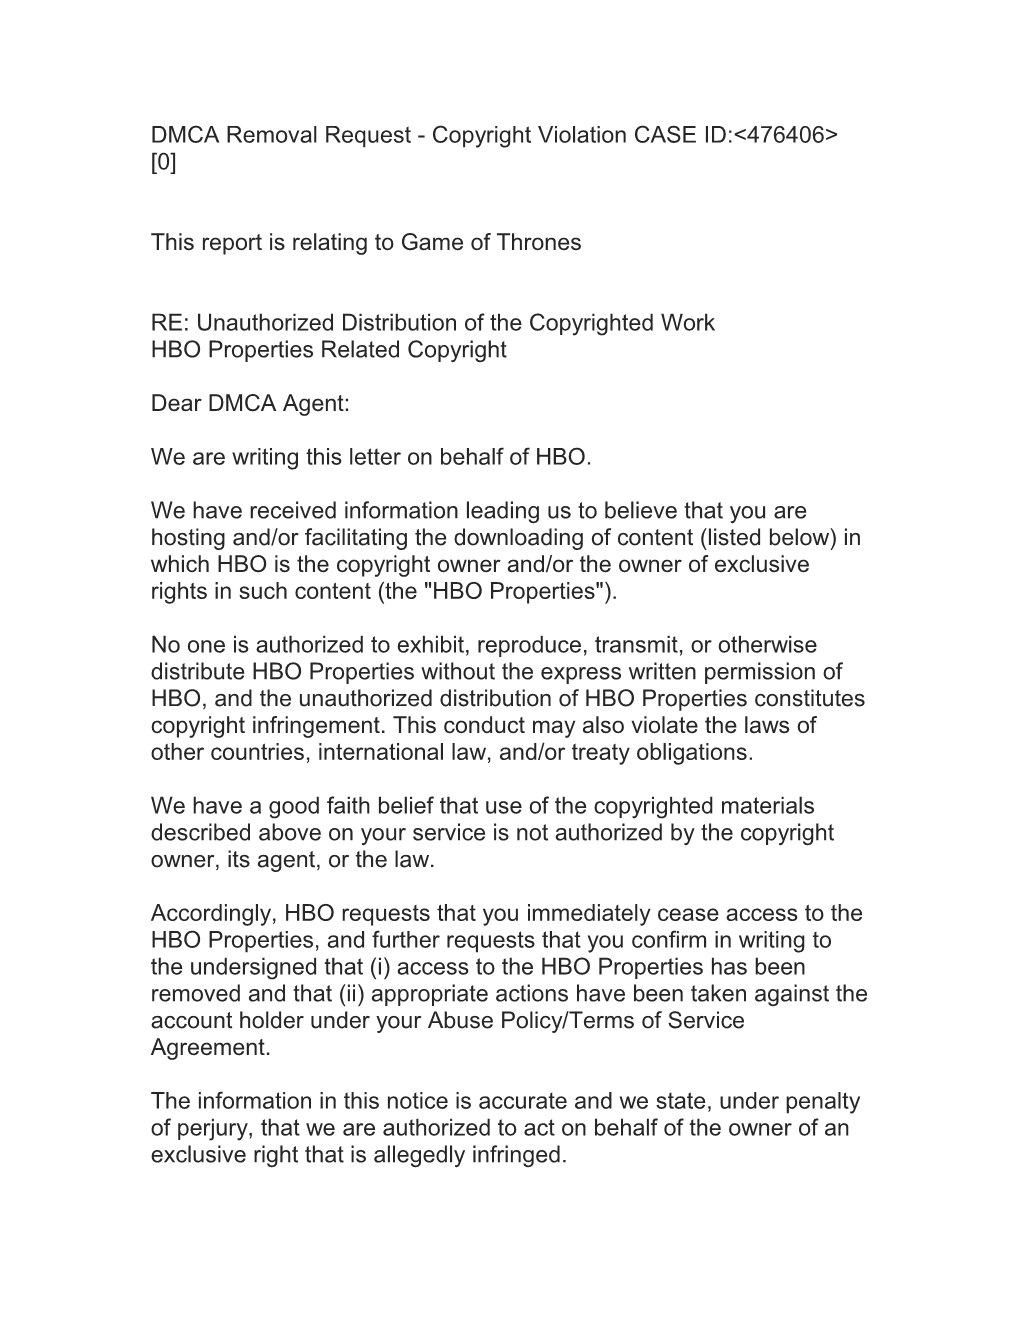 This Report Is Relating to Game of Thrones